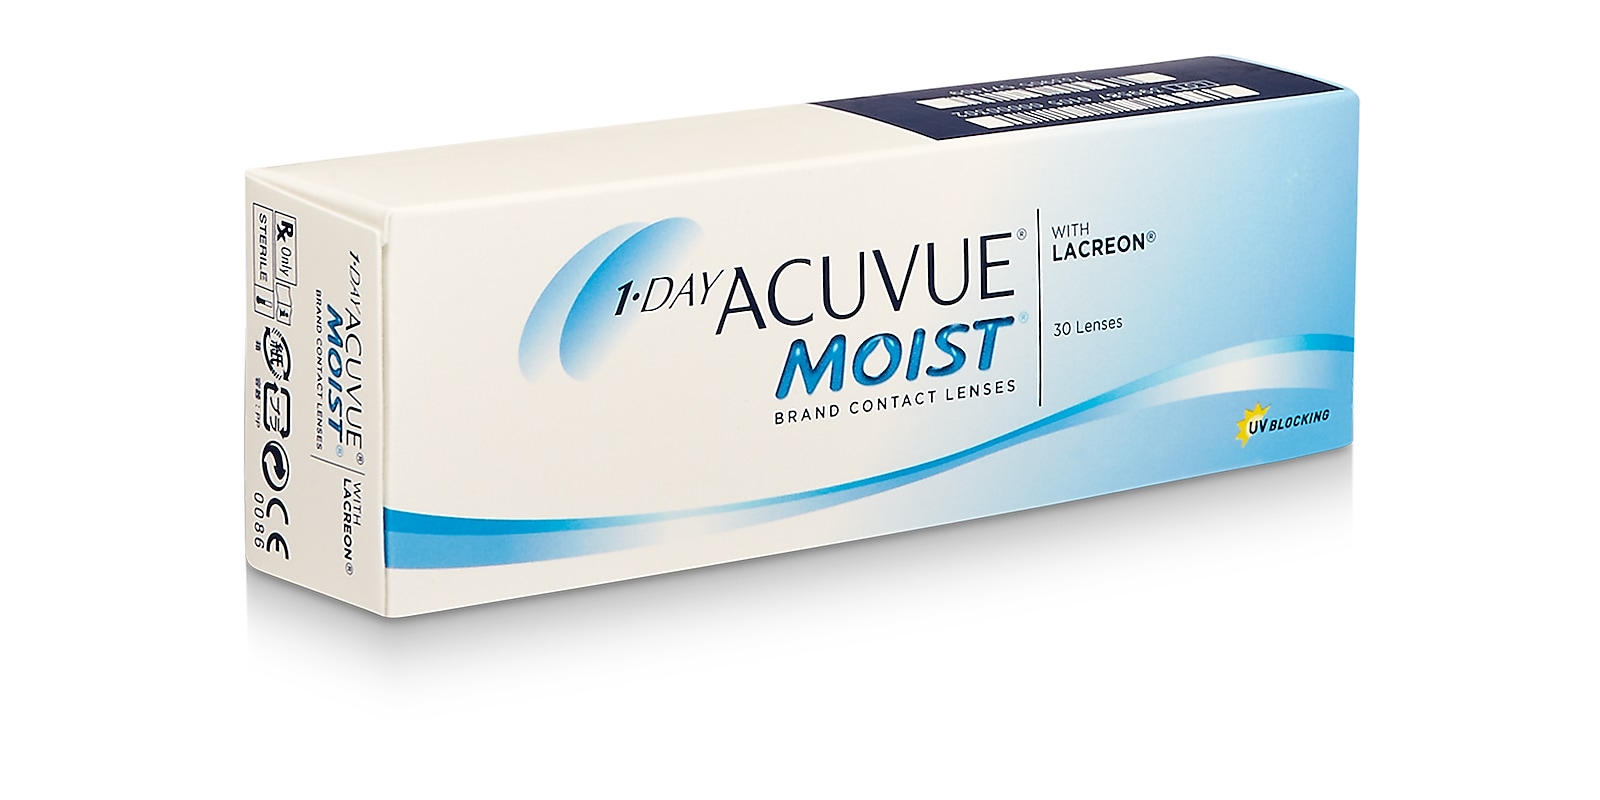 1-Day Acuvue® Moist, 30 pack contact lenses